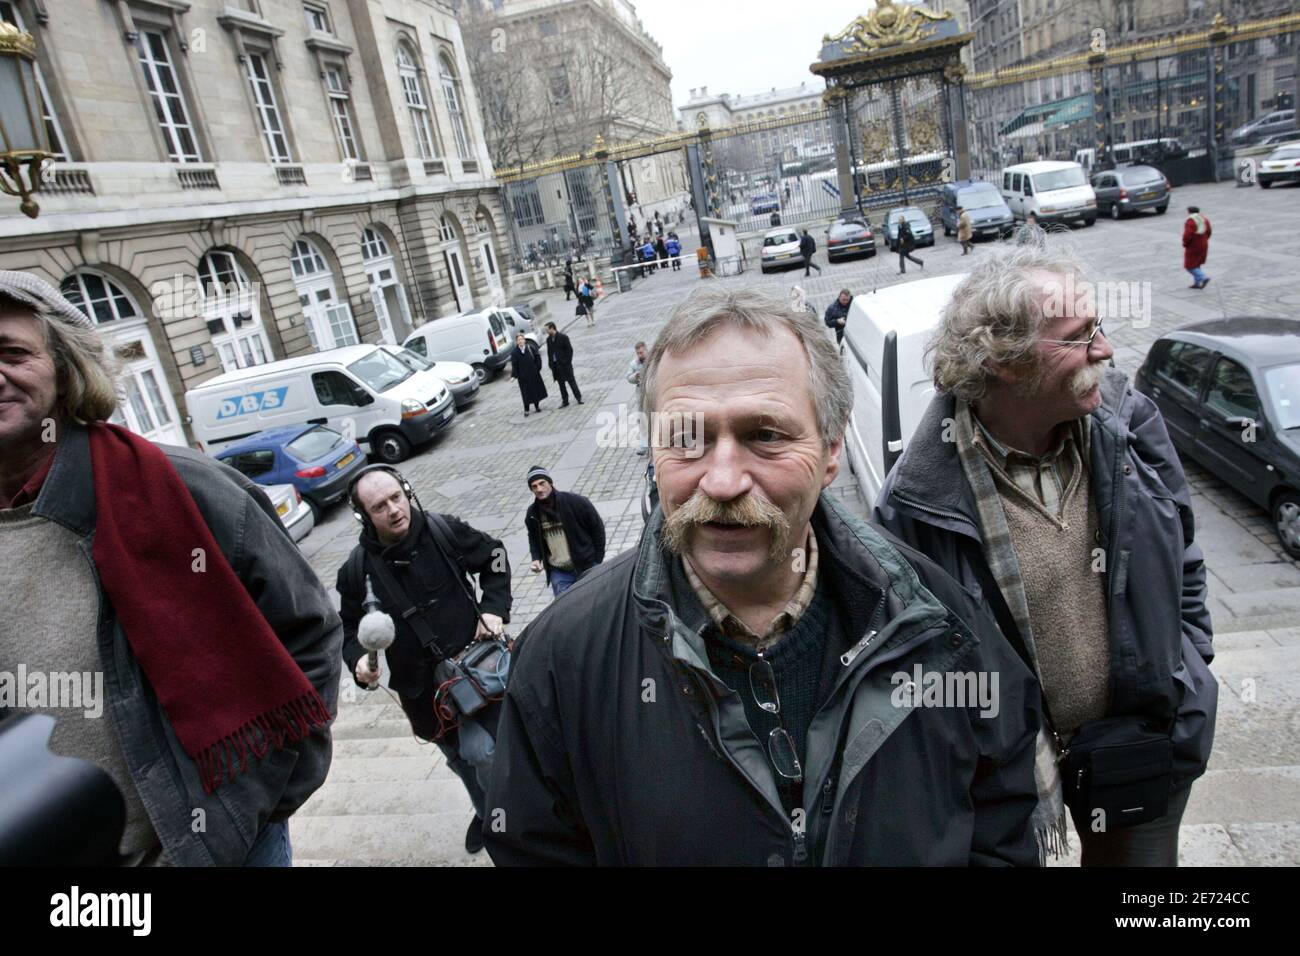 Jose Bove appears in Paris court on february 7, 2007. The appeals court upheld a verdict and four-month jail sentence for French farmer and anti-globalization activist Jose Bove for destroying a field of genetically modified corn. Bove, who wants to run in France's presidential elections this year, was sentenced in 2005 for destroying a field of corn planted by U.S. seed company Pioneer Hi-Bred. Photo by Thibault Camus/ABACAPRESS.COM Stock Photo